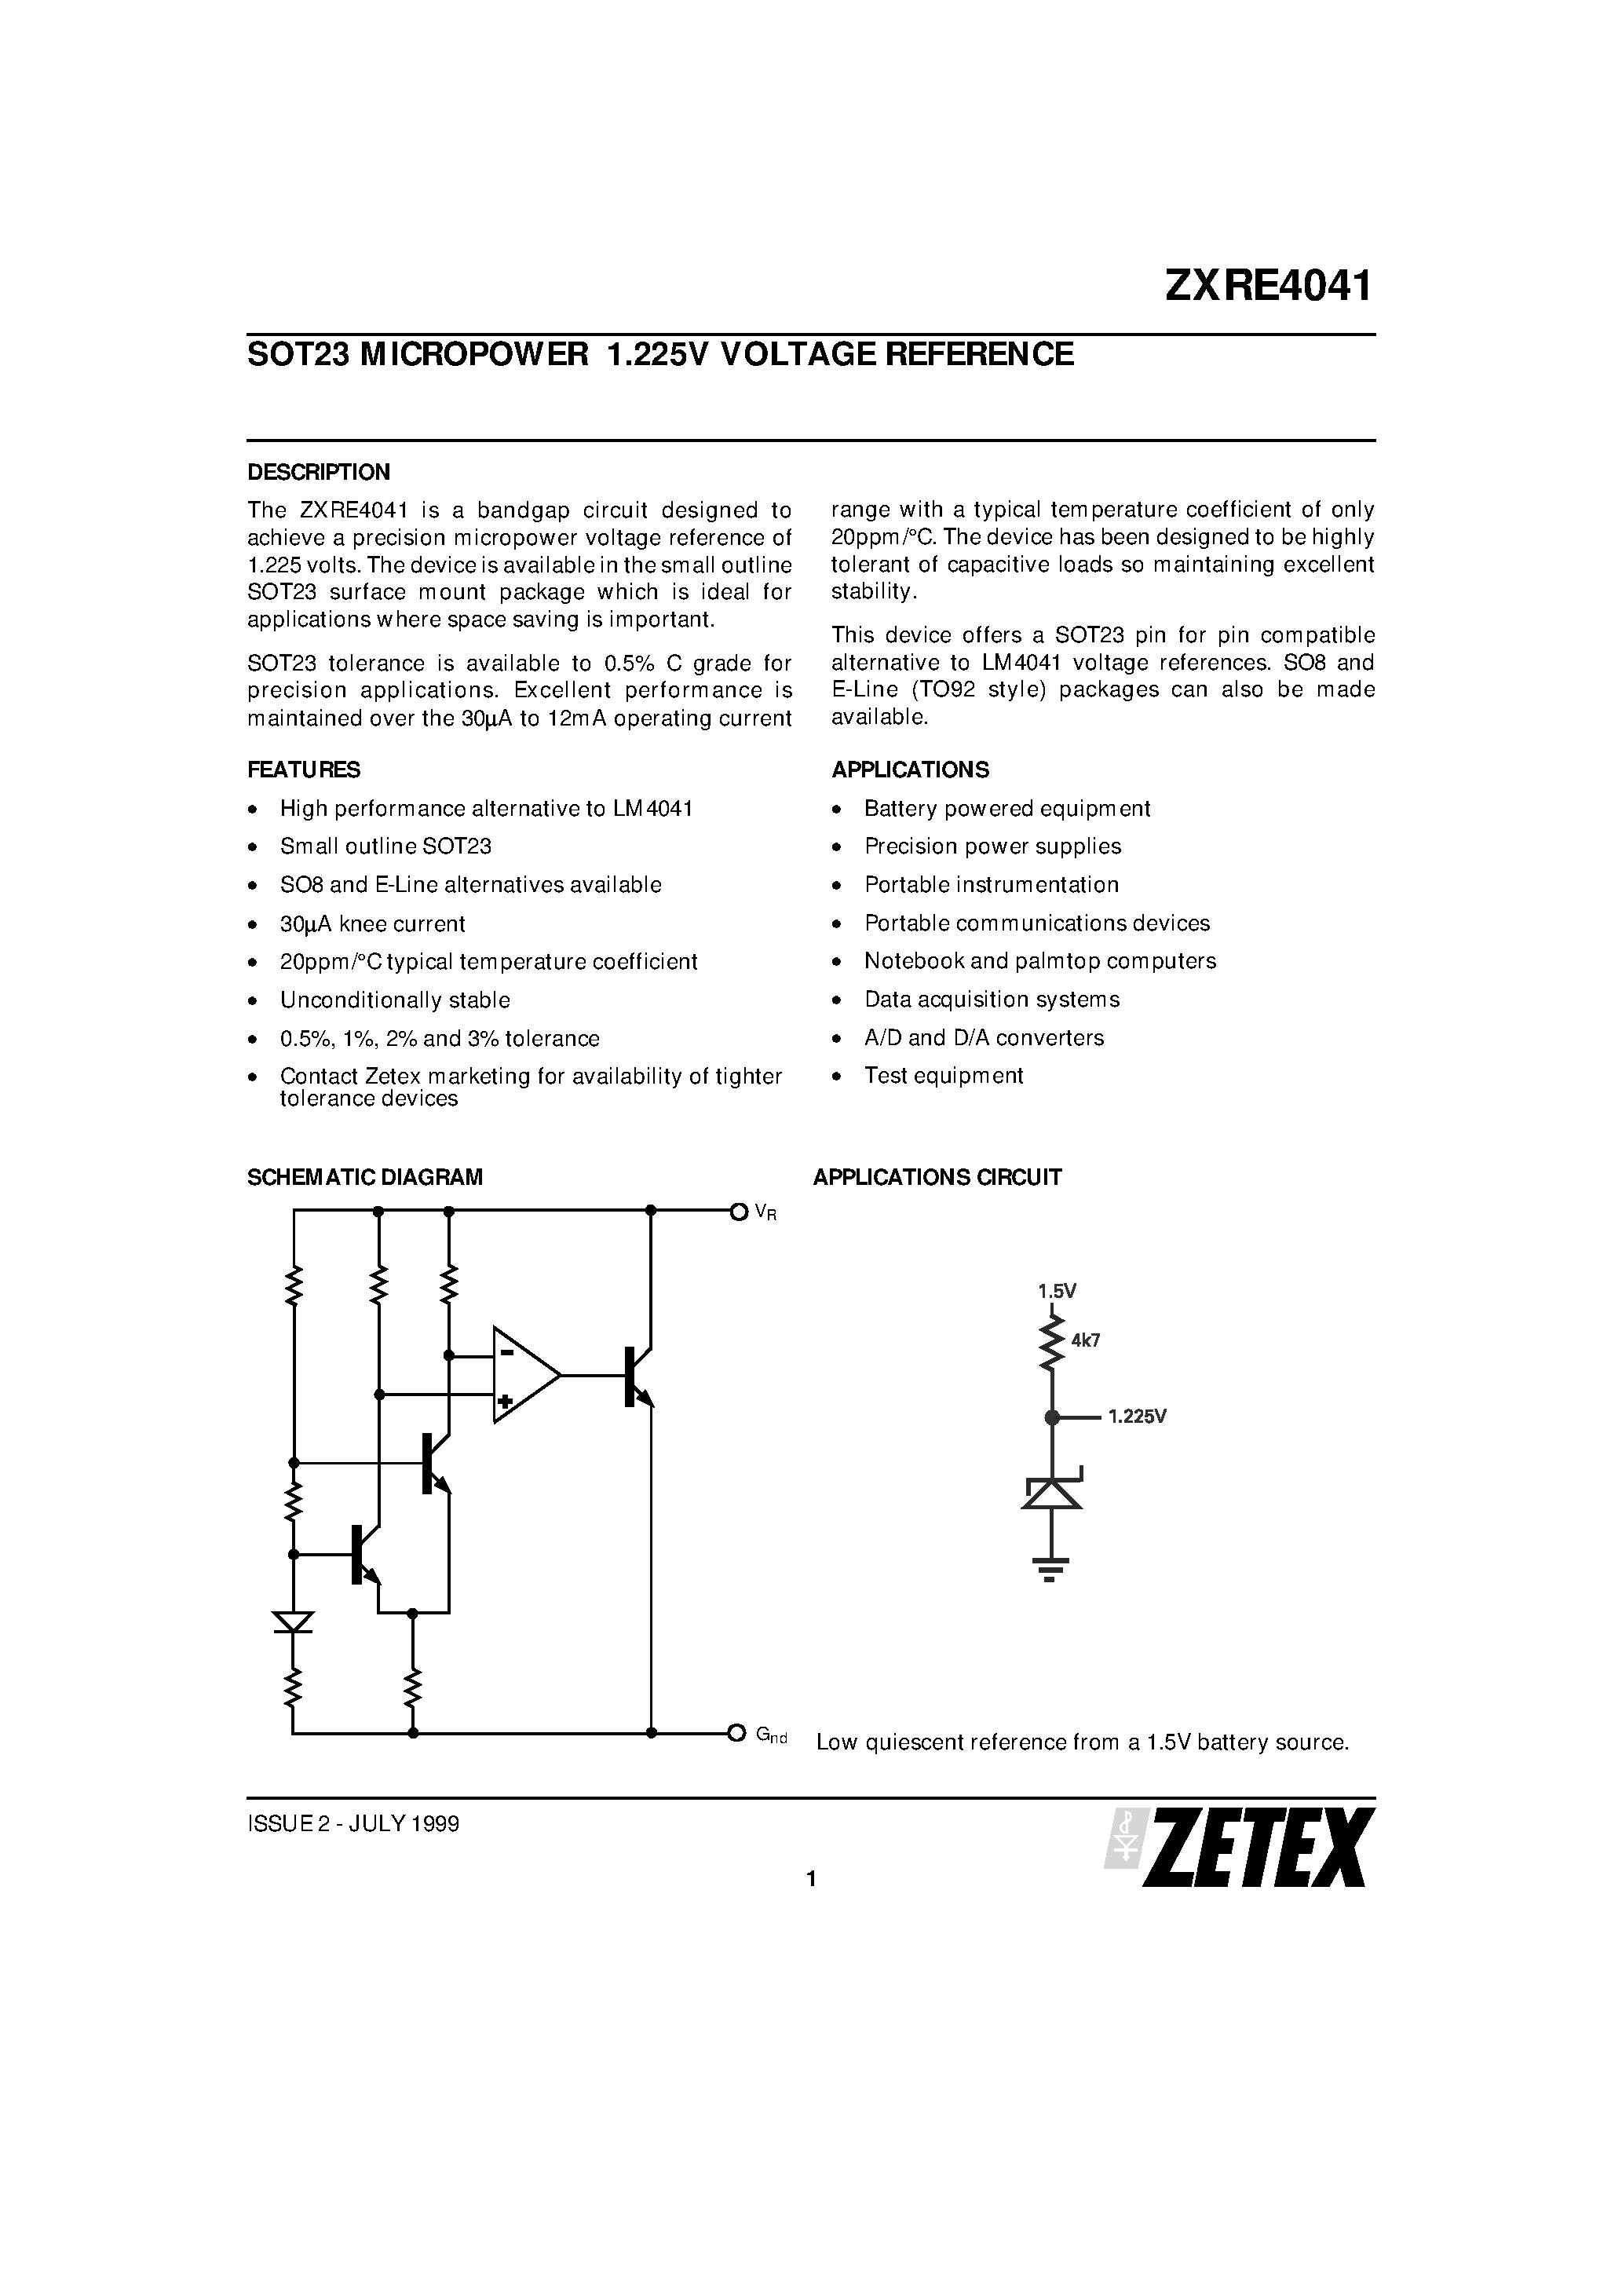 Даташит ZXRE4041 - SOT23 MICROPOWER 1.225V VOLTAGE REFERENCE страница 1